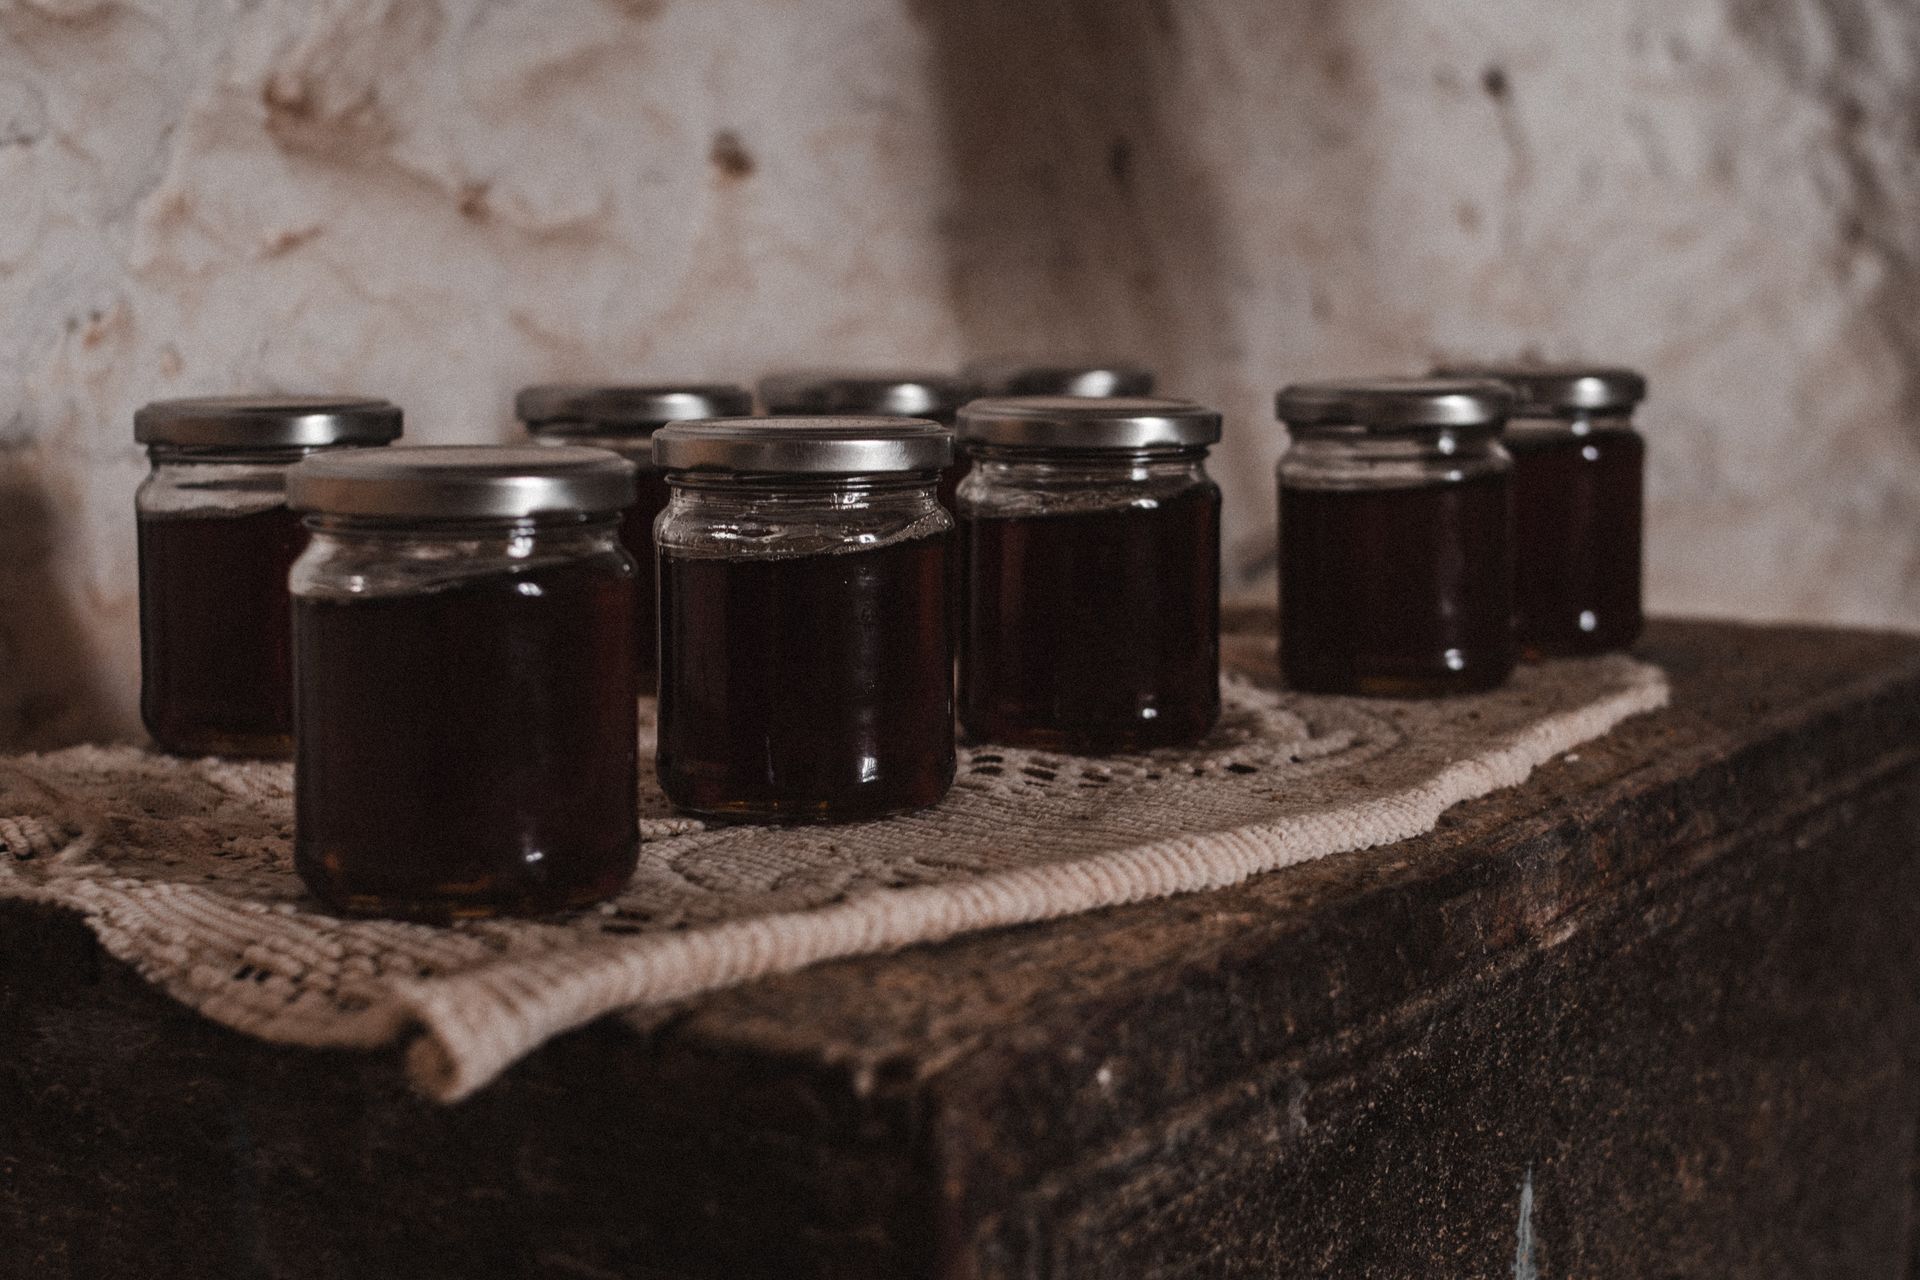 a row of jars filled with dark liquid on a table